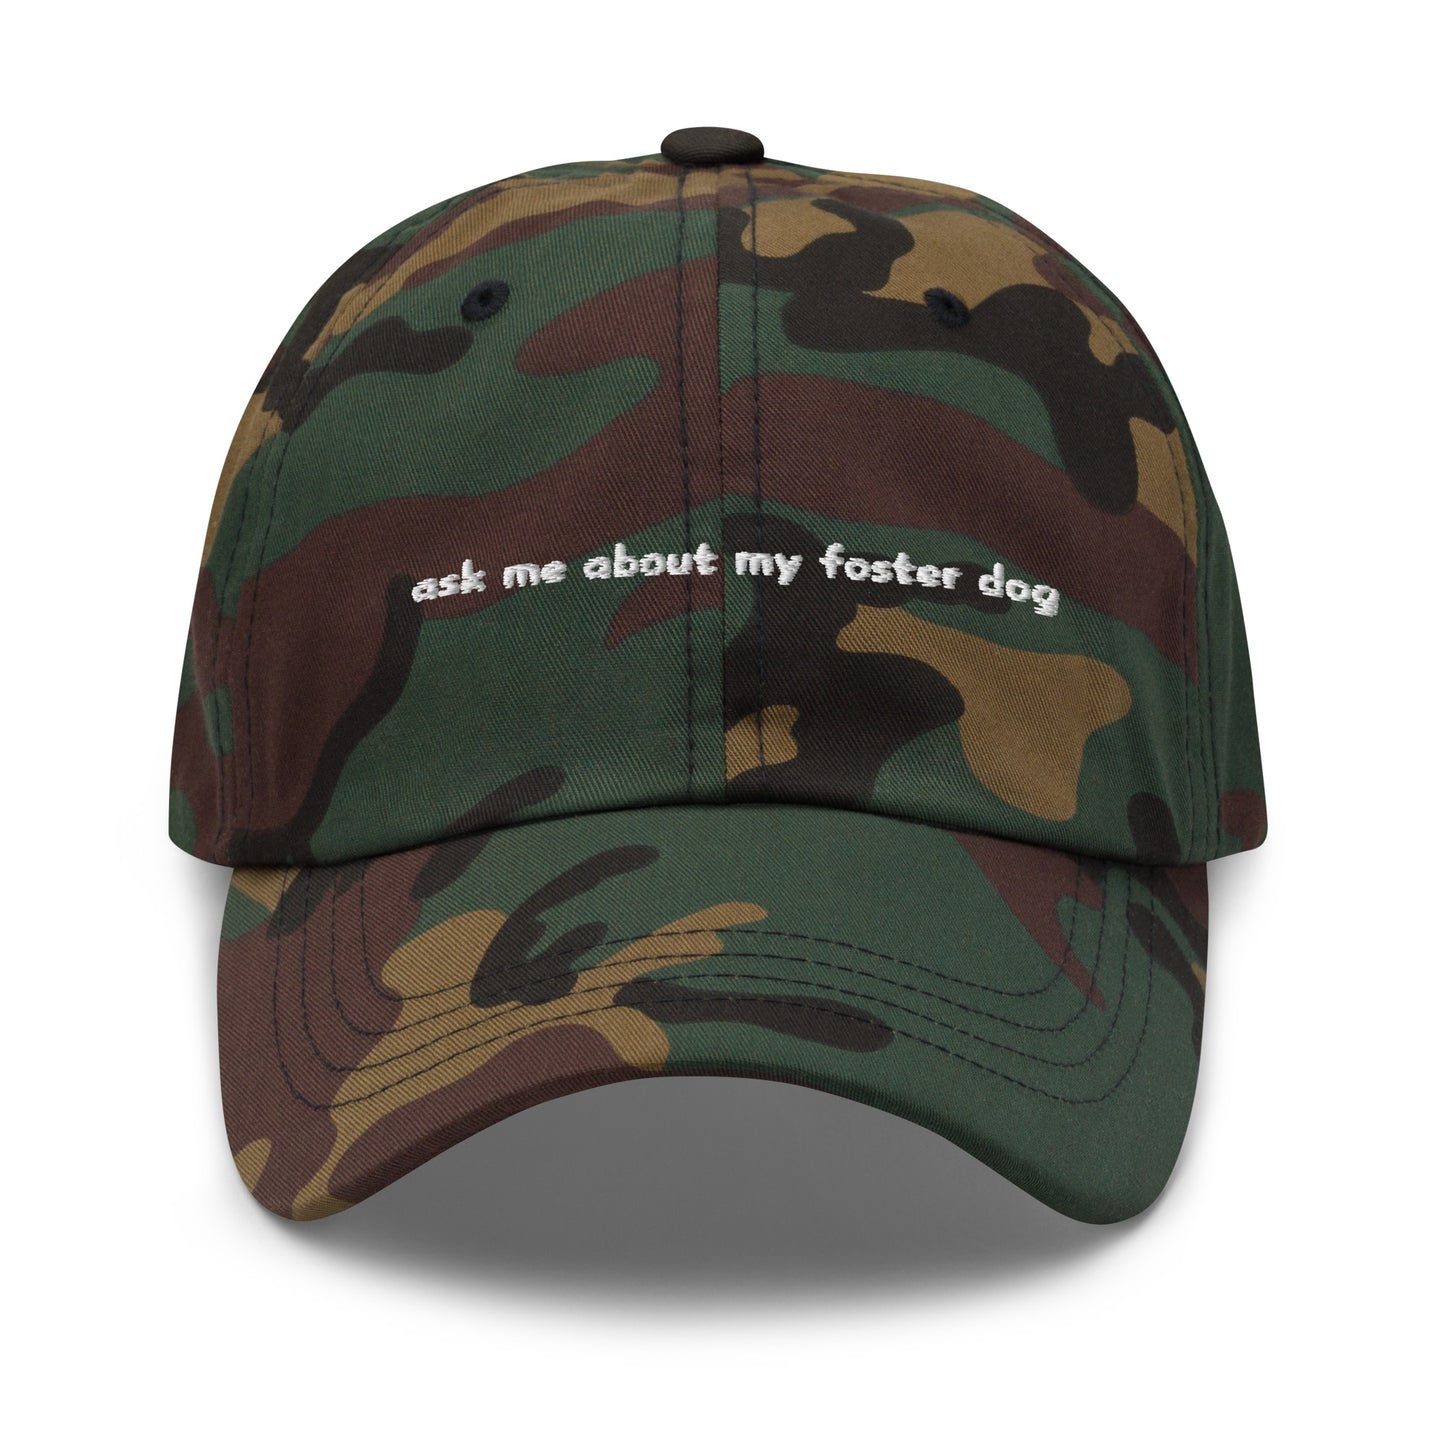 The Foster Dog Hat